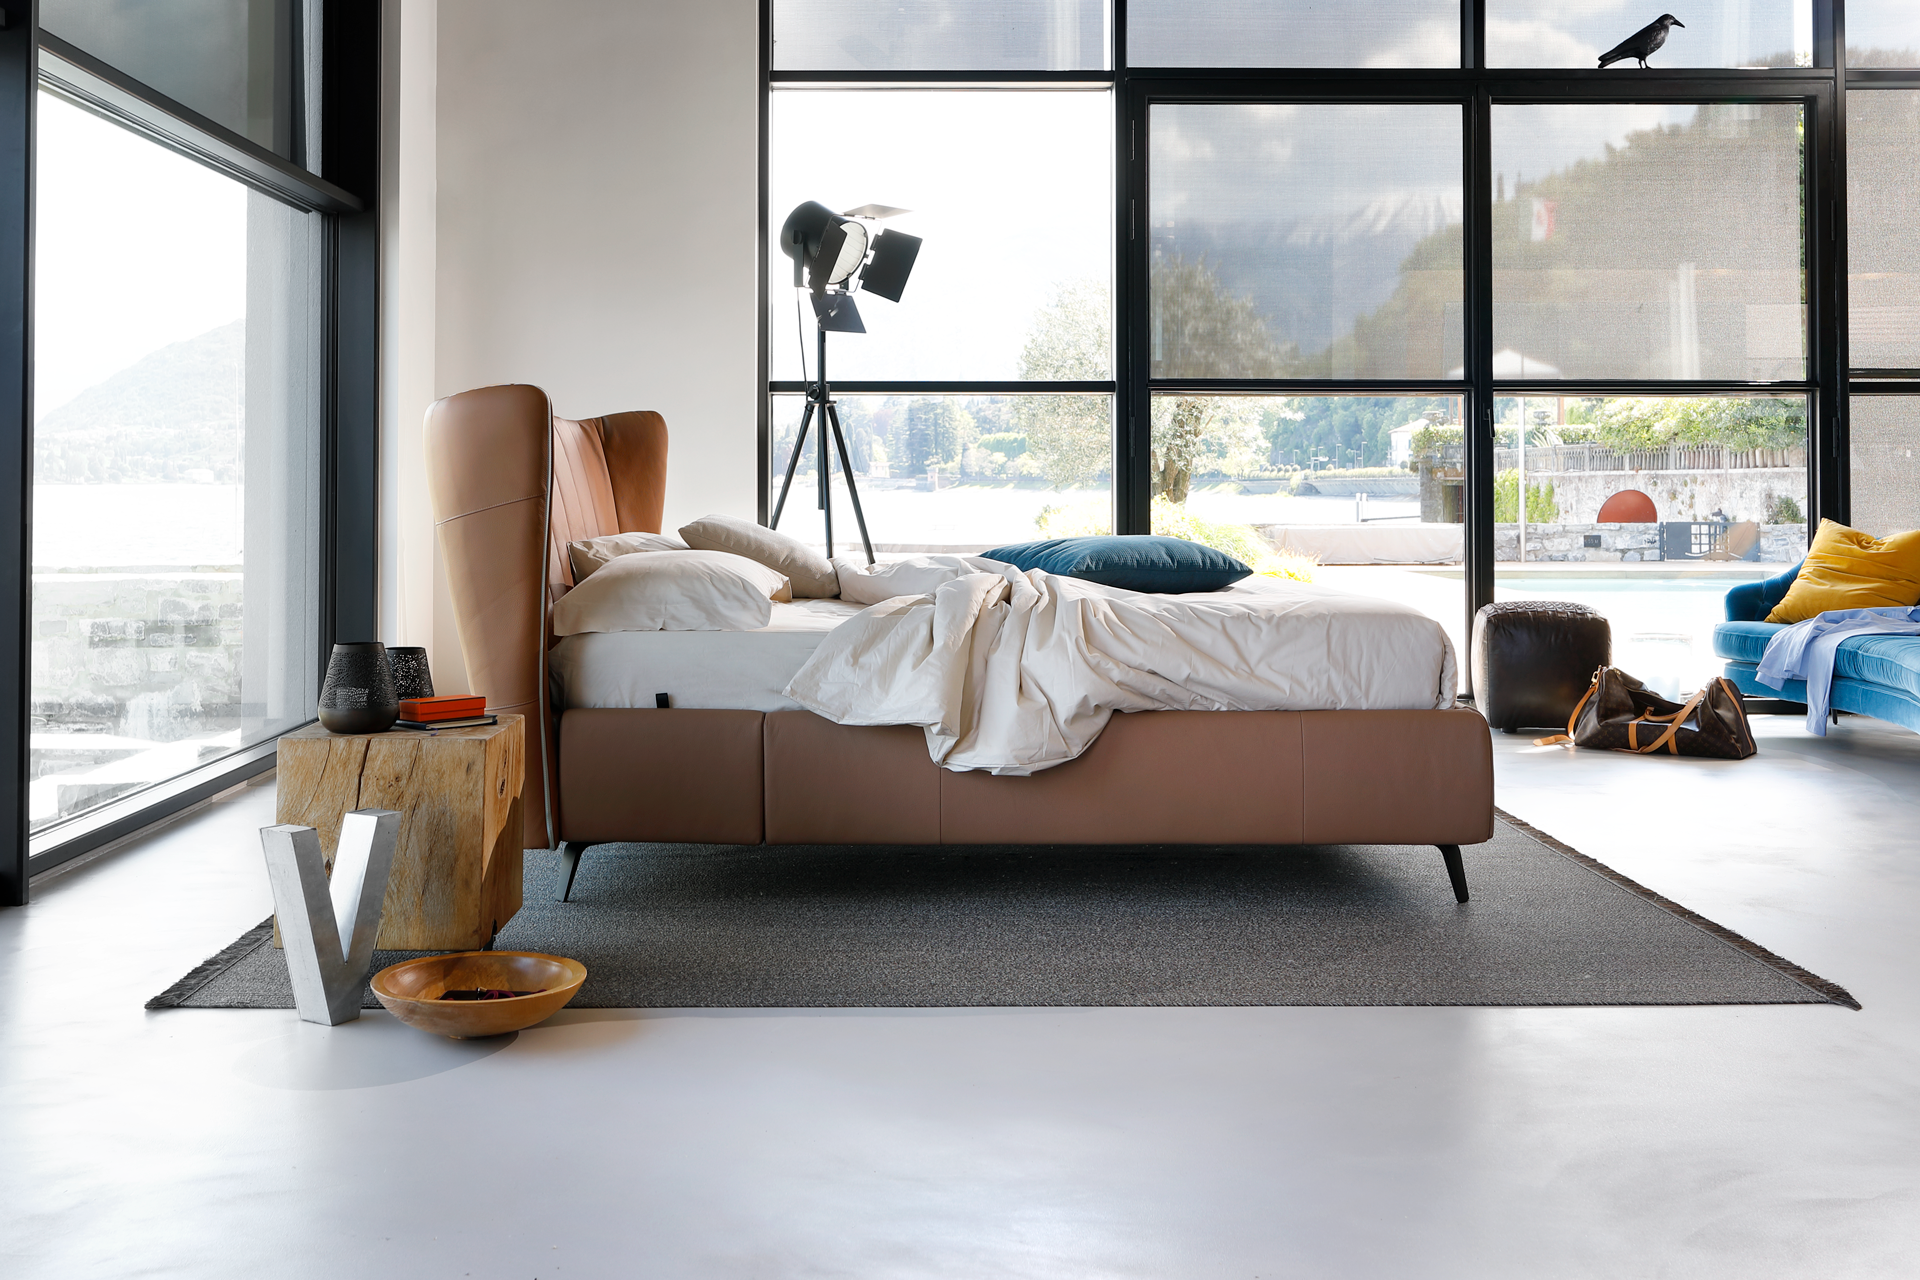 Noctis beds bedroom furniture italian cyprus Takis Angelides Furnihome beds with storage